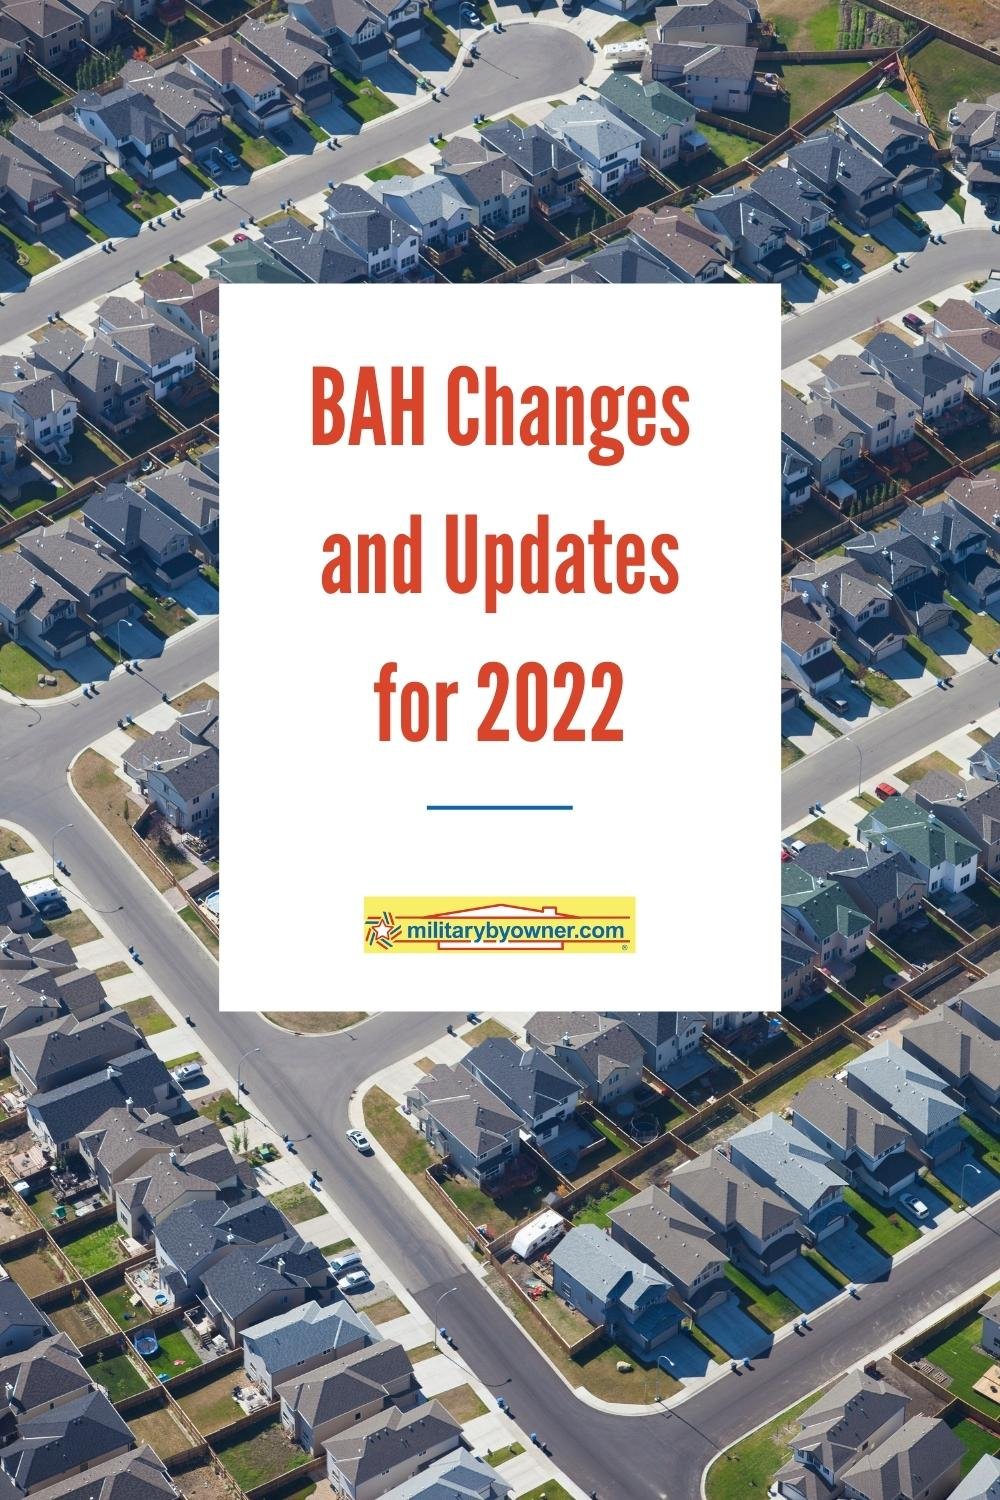 BAH Changes and Updates for 2022